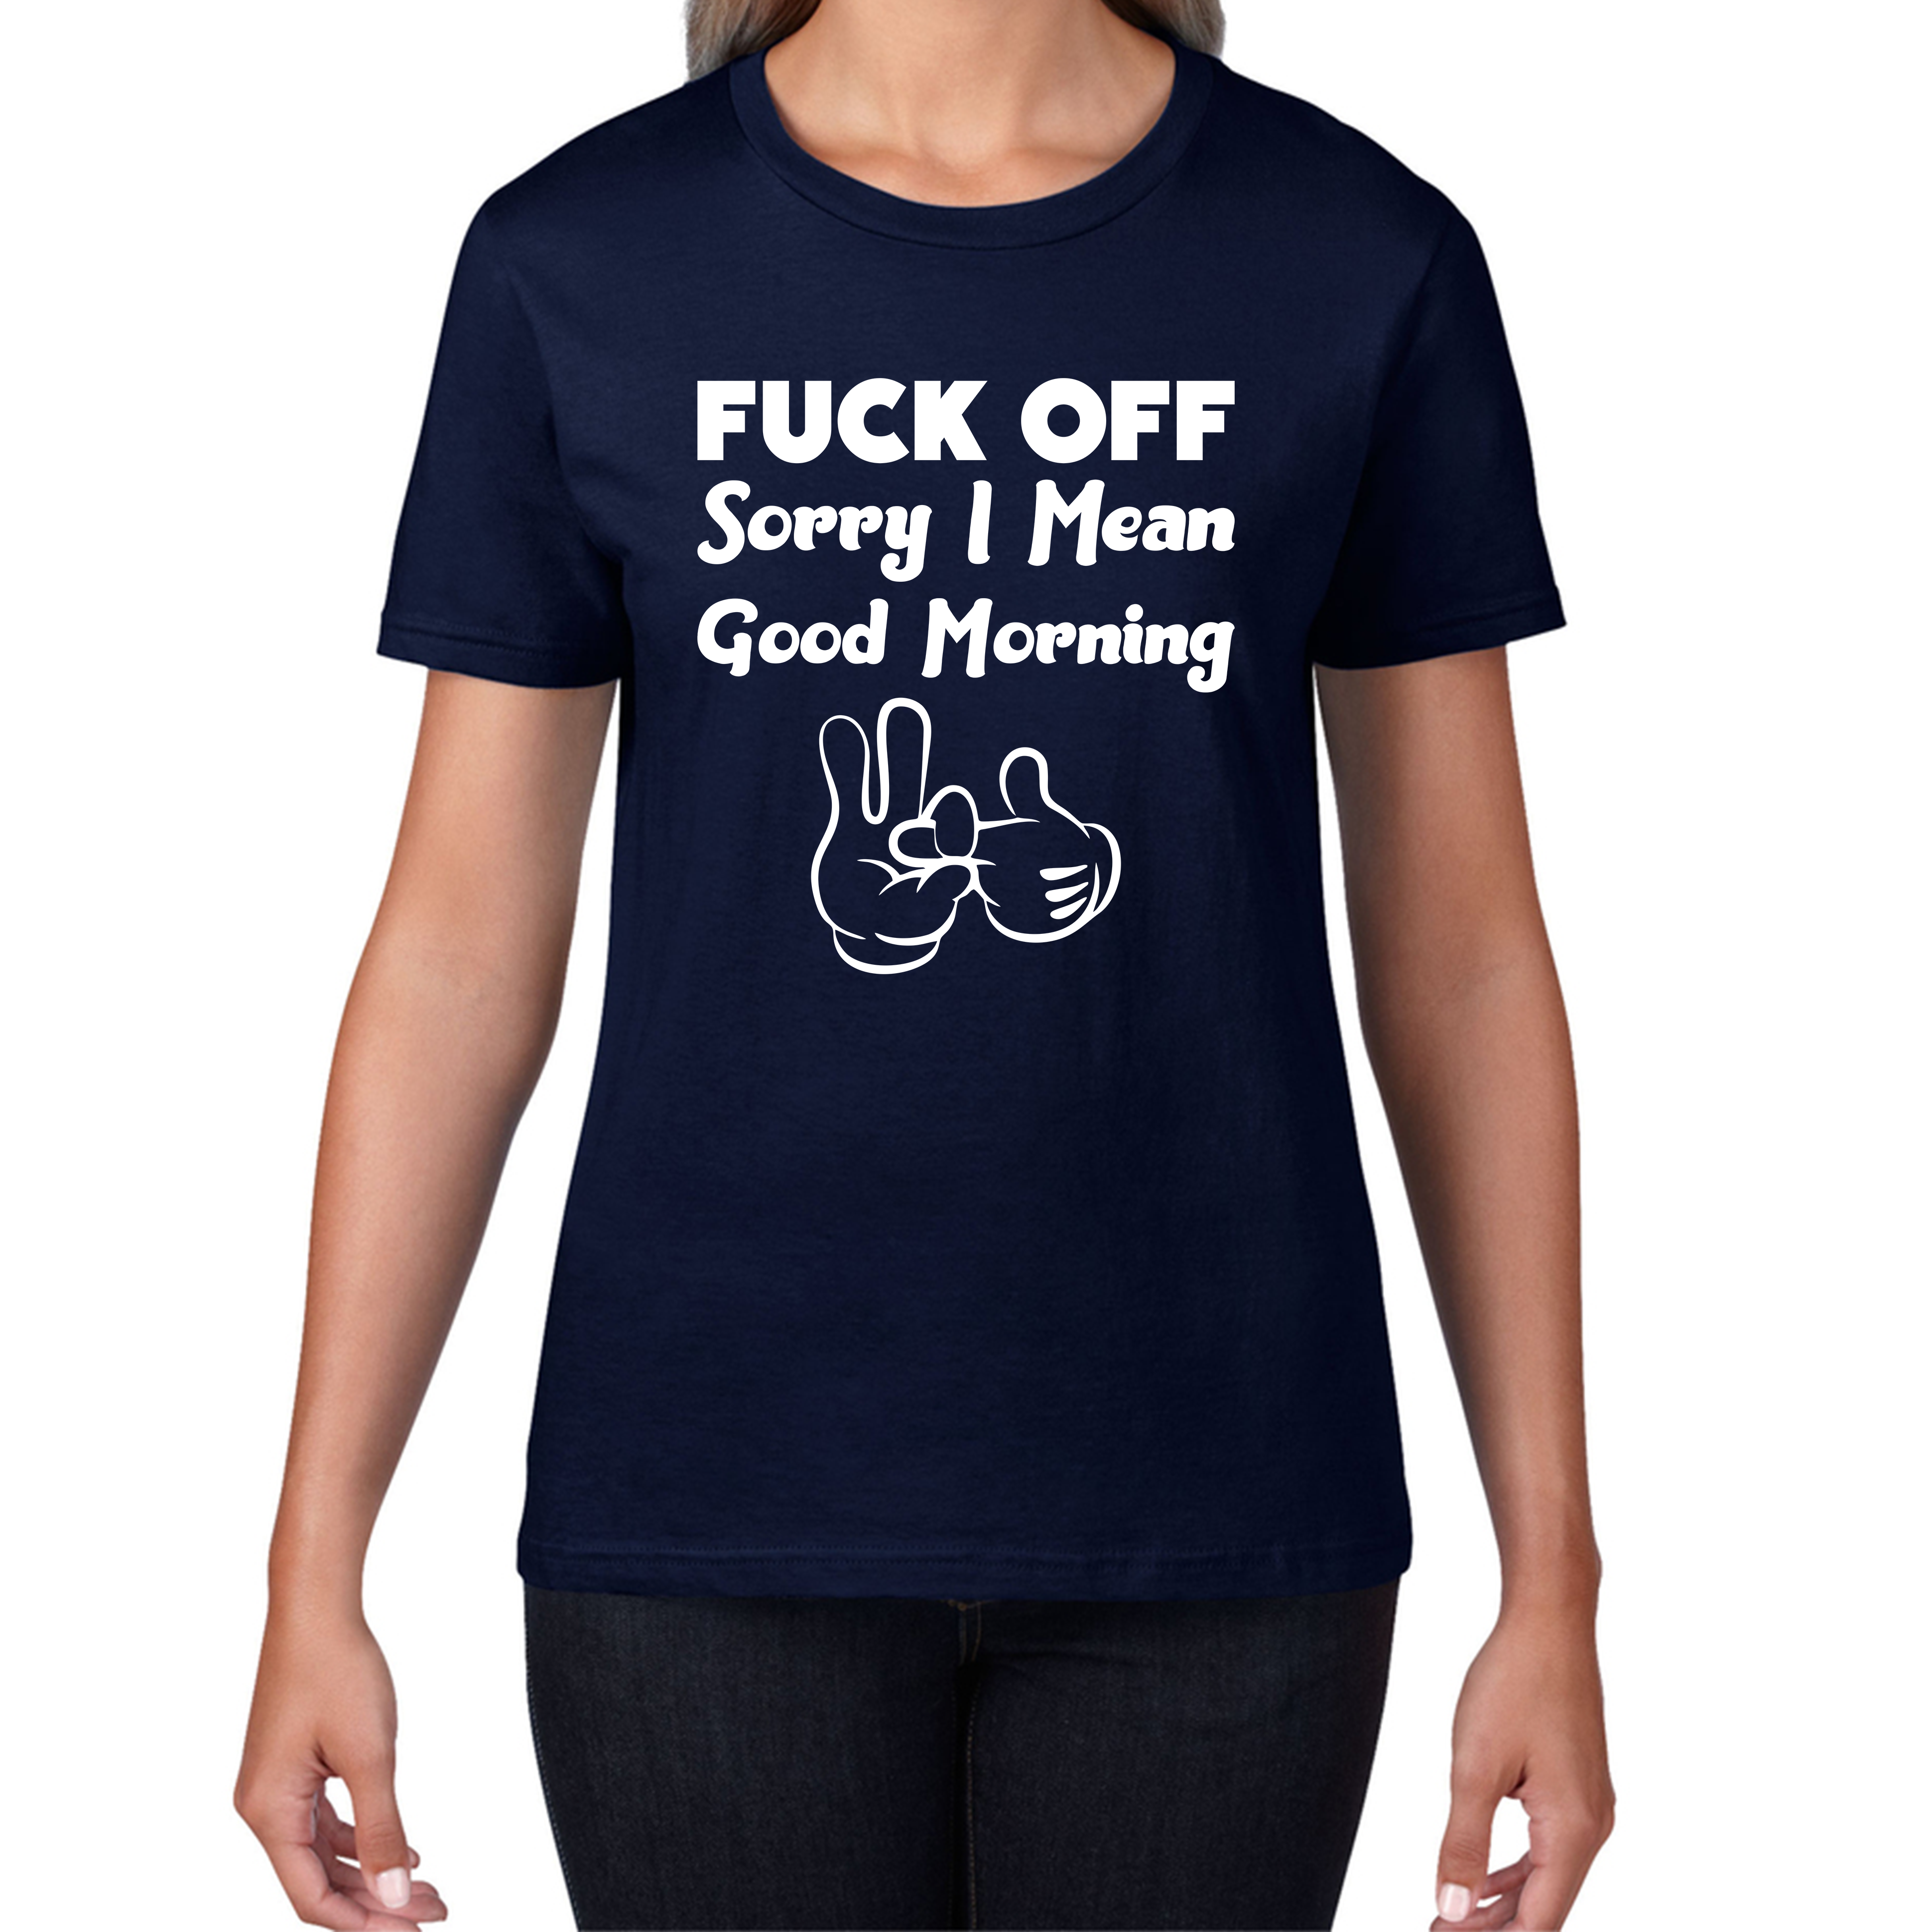 Fuck Off Sorry I Mean Good Morning Funny Offensive Novelty Sarcastic Humour Womens Tee Top